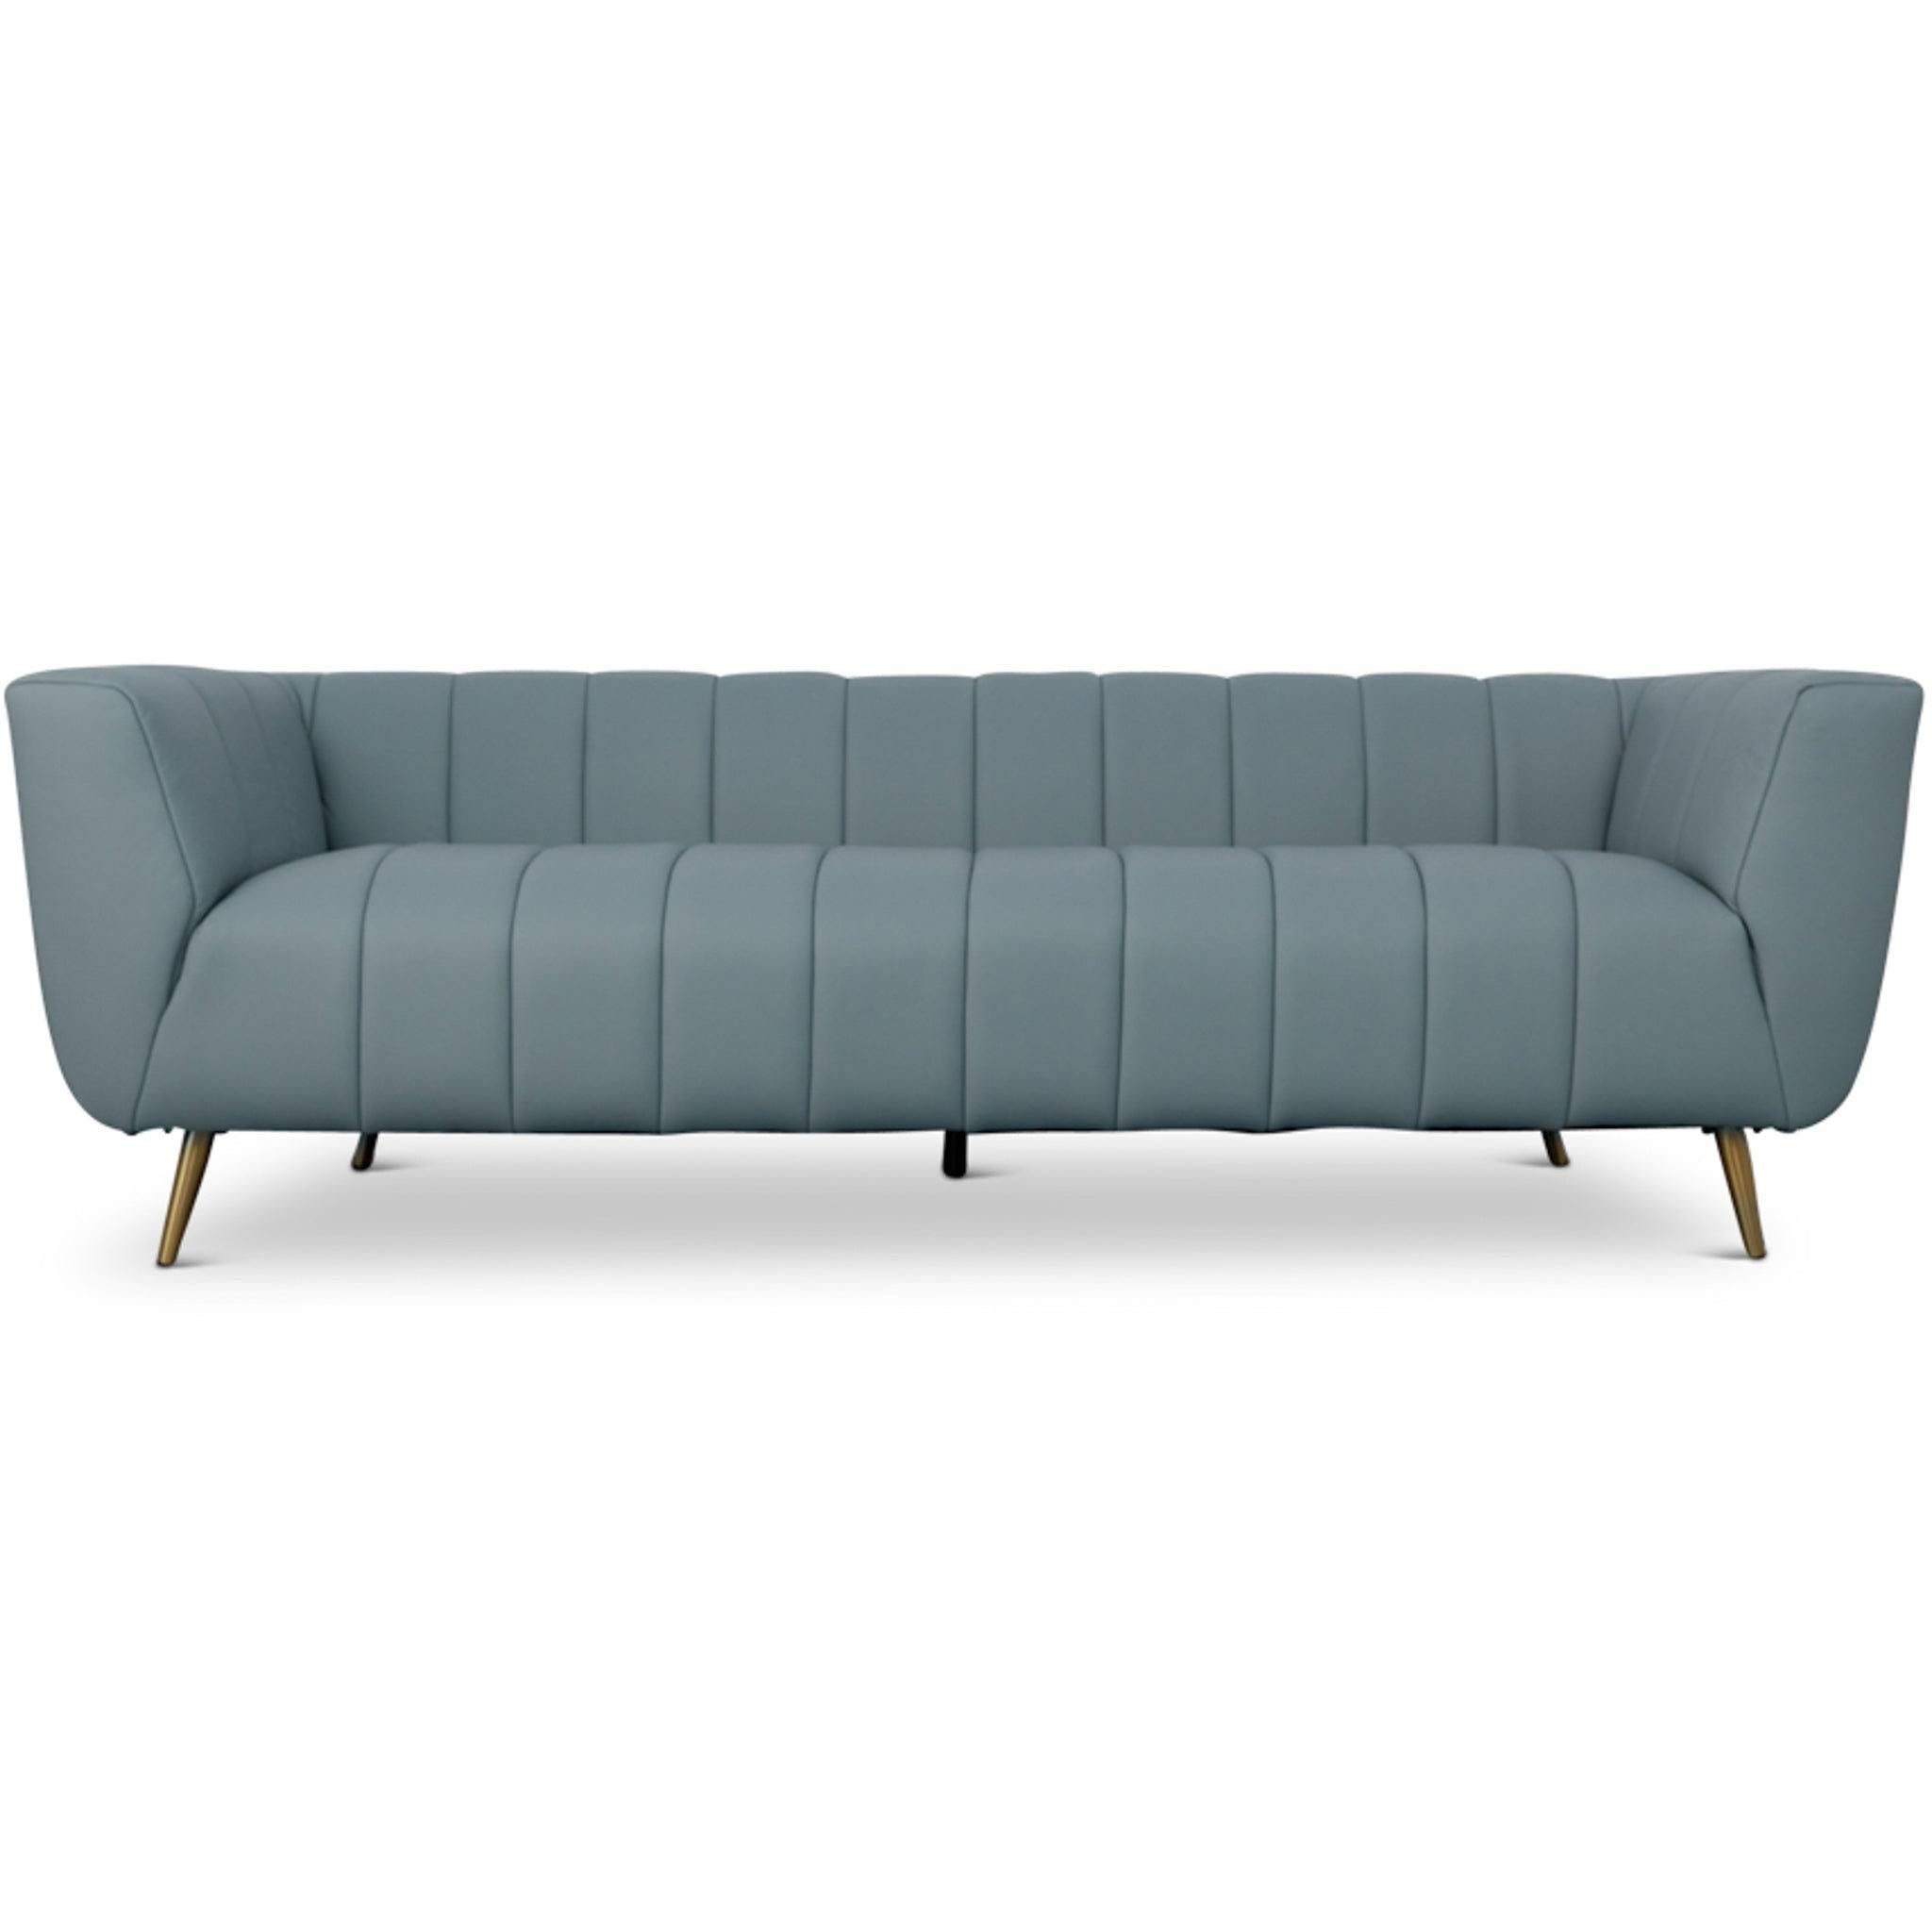 Sophisticated Blue Leather Tufted Sofa with 750 lb. Weight Capacity - Square Arm, Comfortable Seating, and Quick Assembly | Image